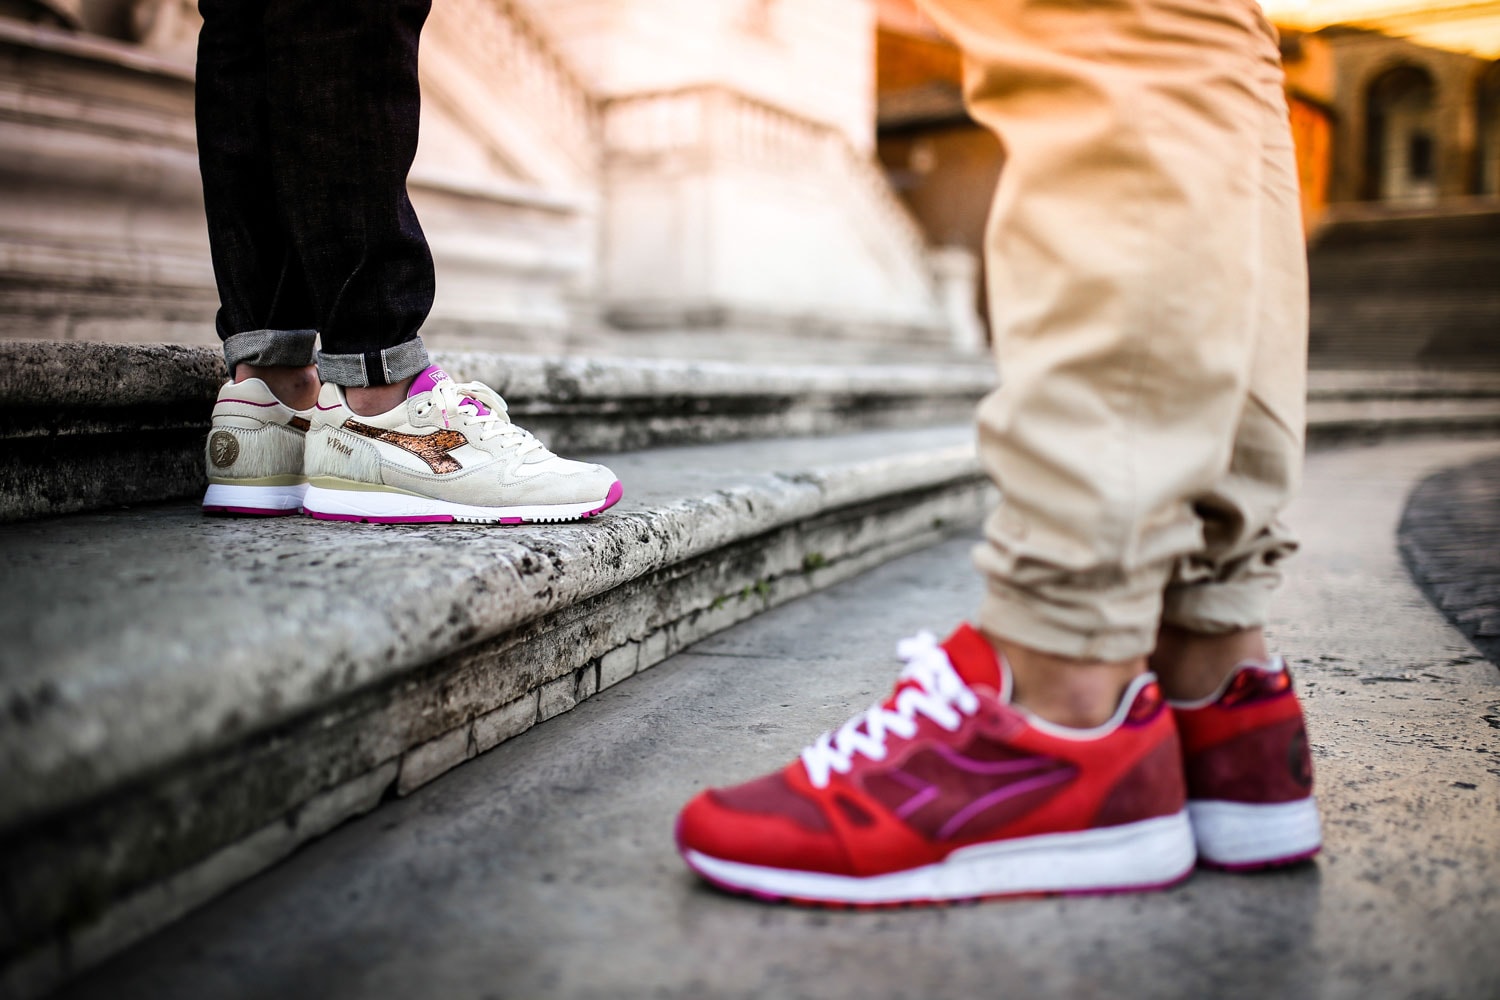 The Good Will Out x Diadora's The Rise and Fall of The Roman Empire Pack